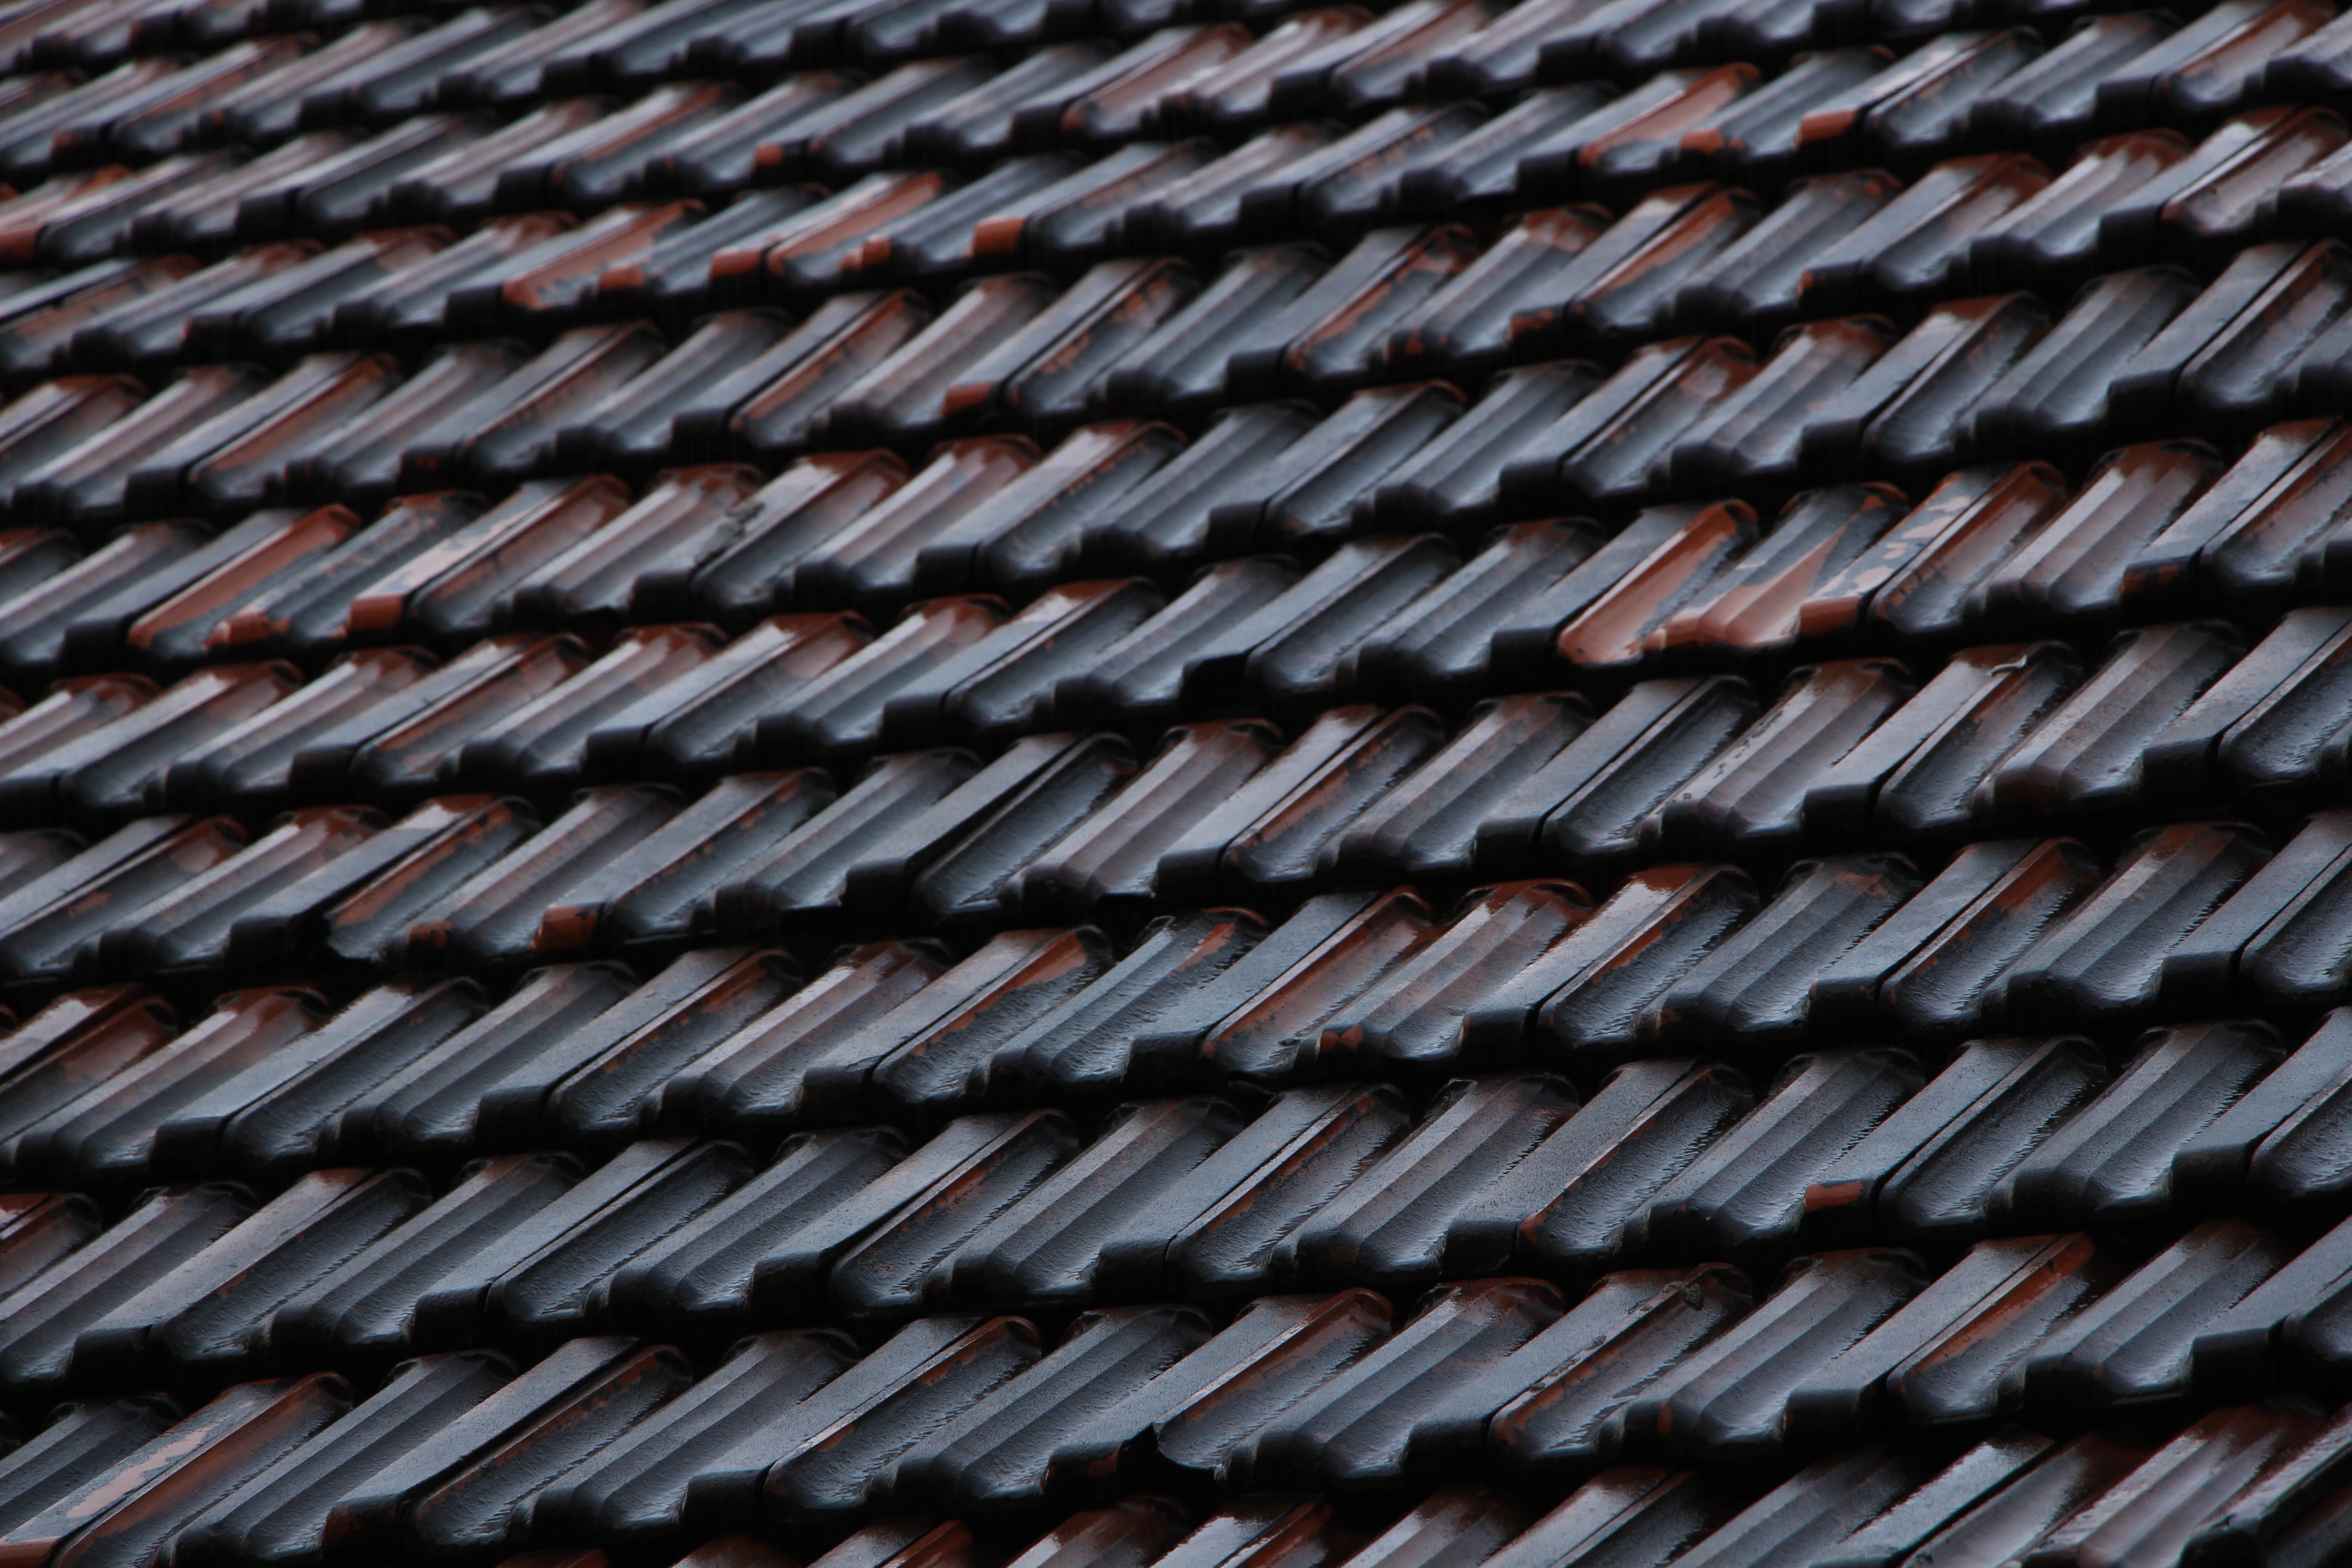 Covering shingles, coating, textures, texture Free Stock Photos